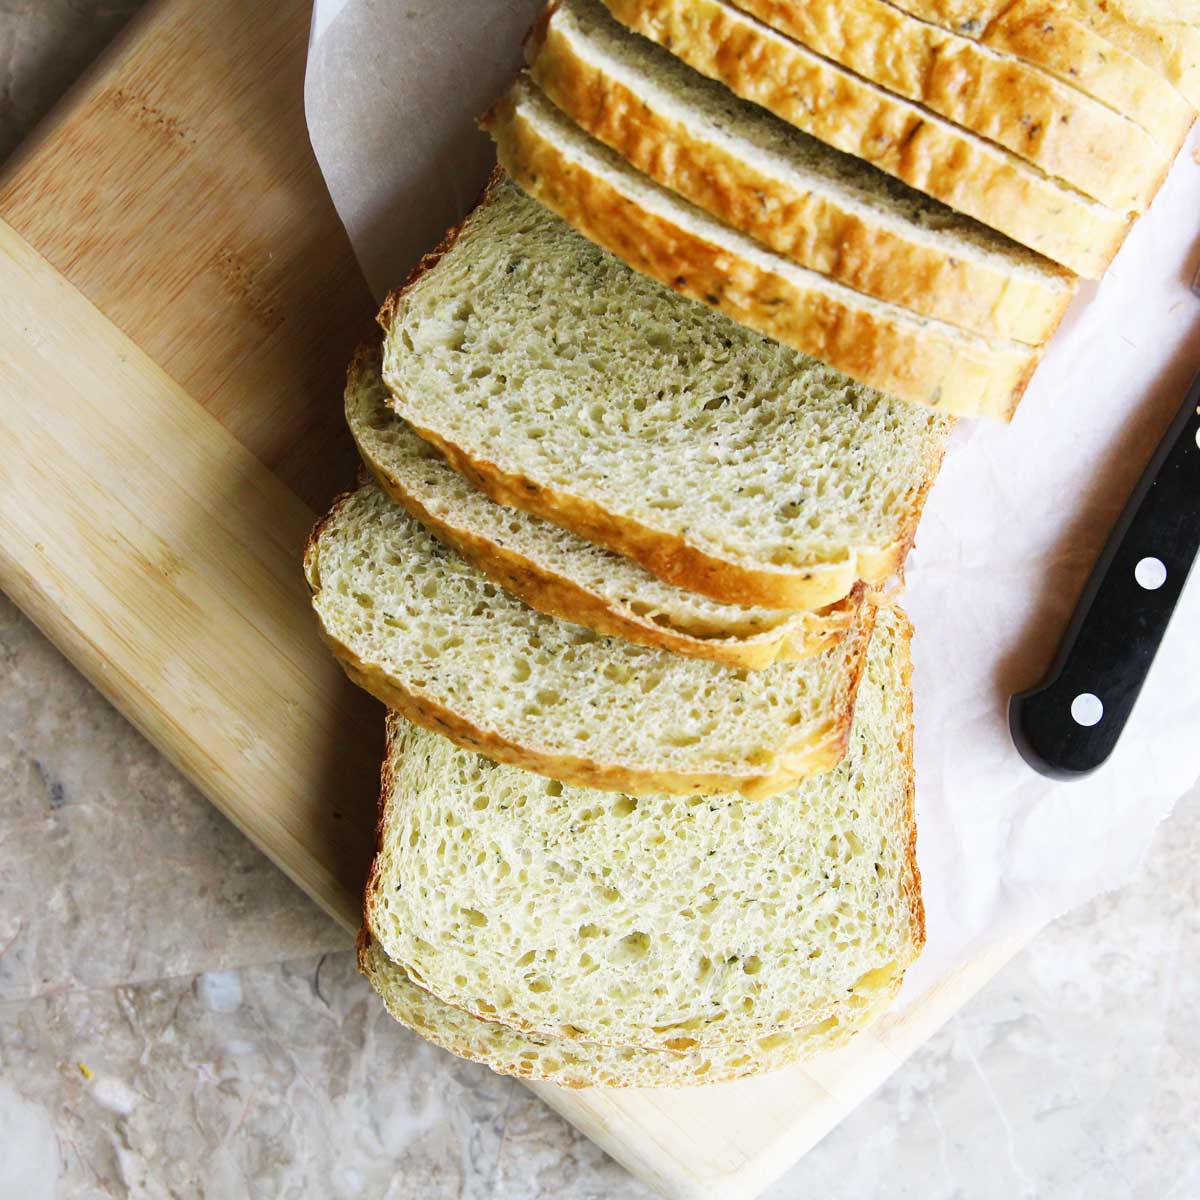 Applesauce Yeast Bread (A Healthier Recipe for White Bread) - applesauce yeast bread